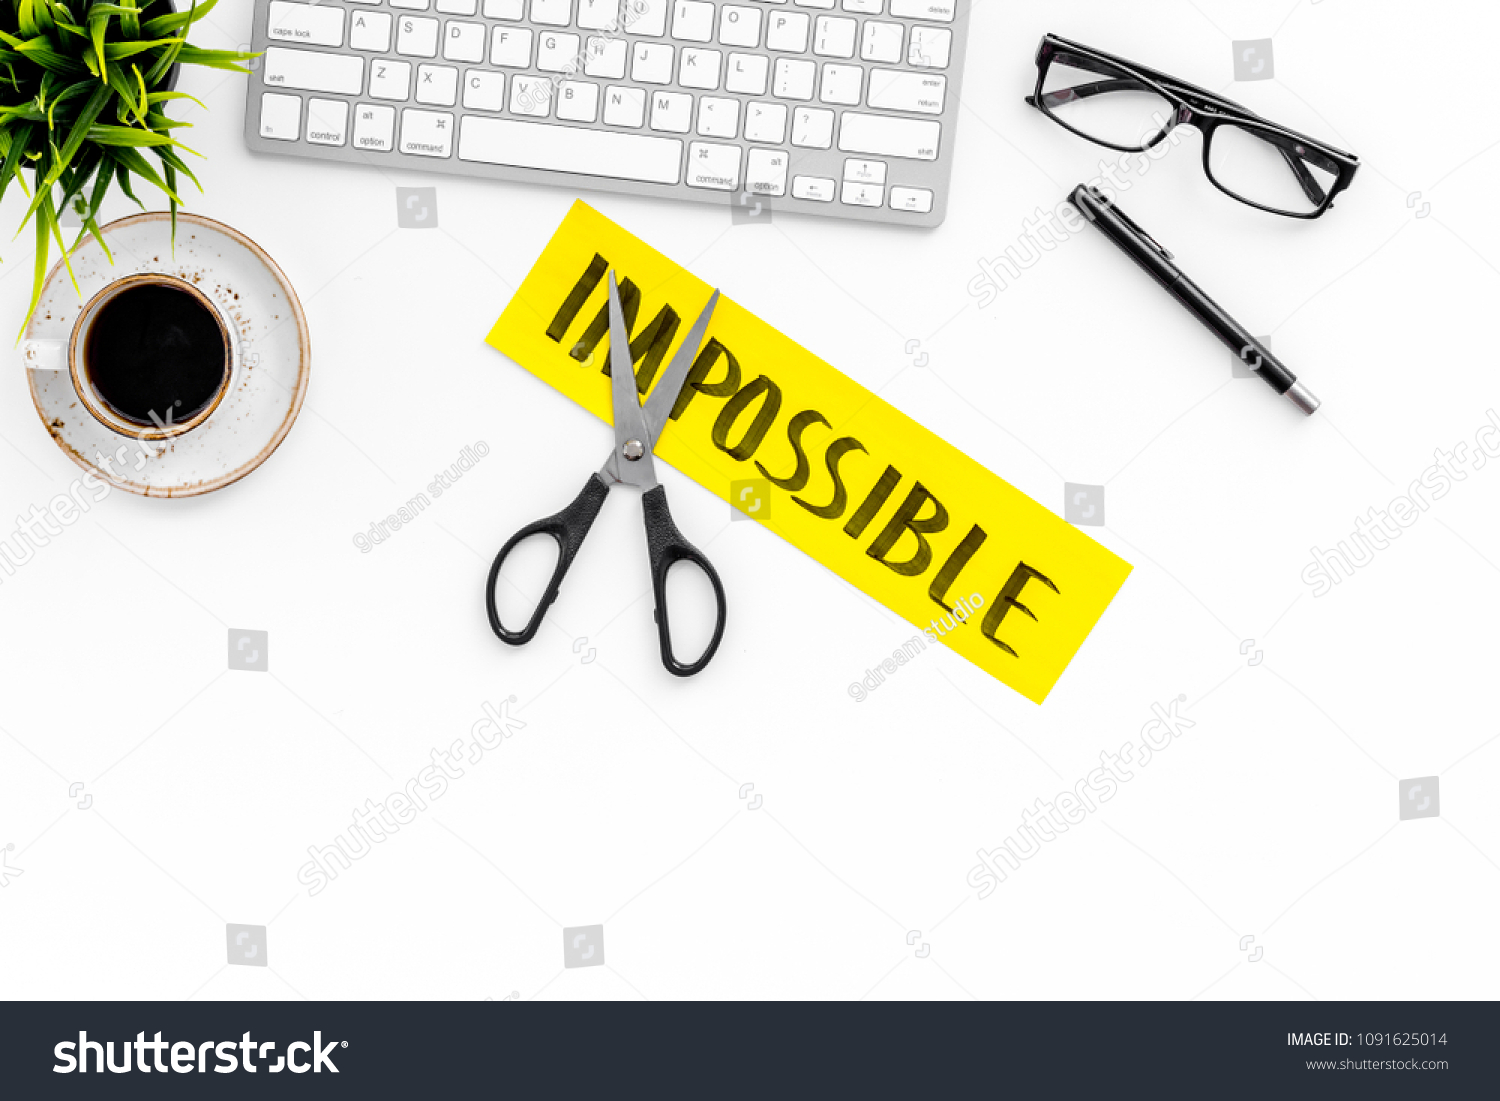 All is possible concept. Cutting the part im of written word impossible by sciccors. Office desk. White background top view copy space #1091625014